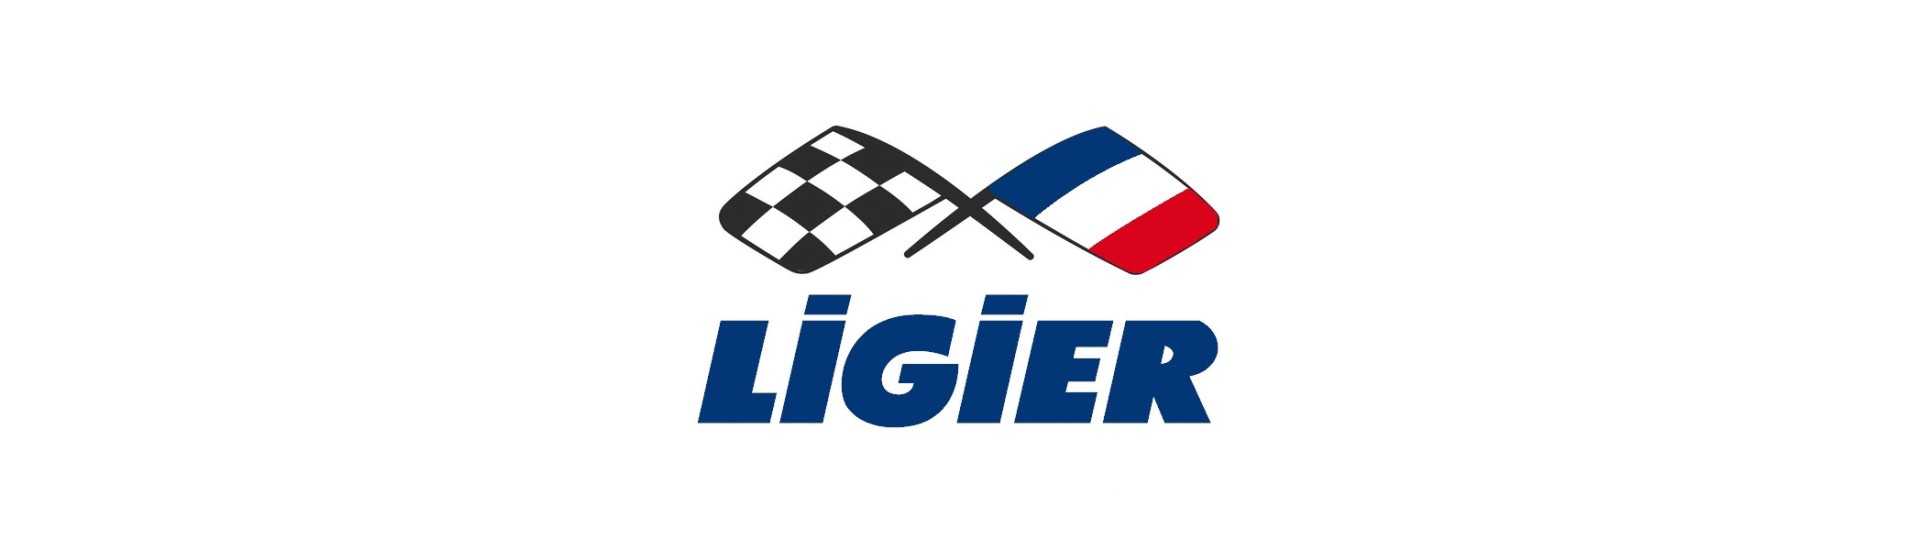 Brake divider at best price for car without a permit Ligier